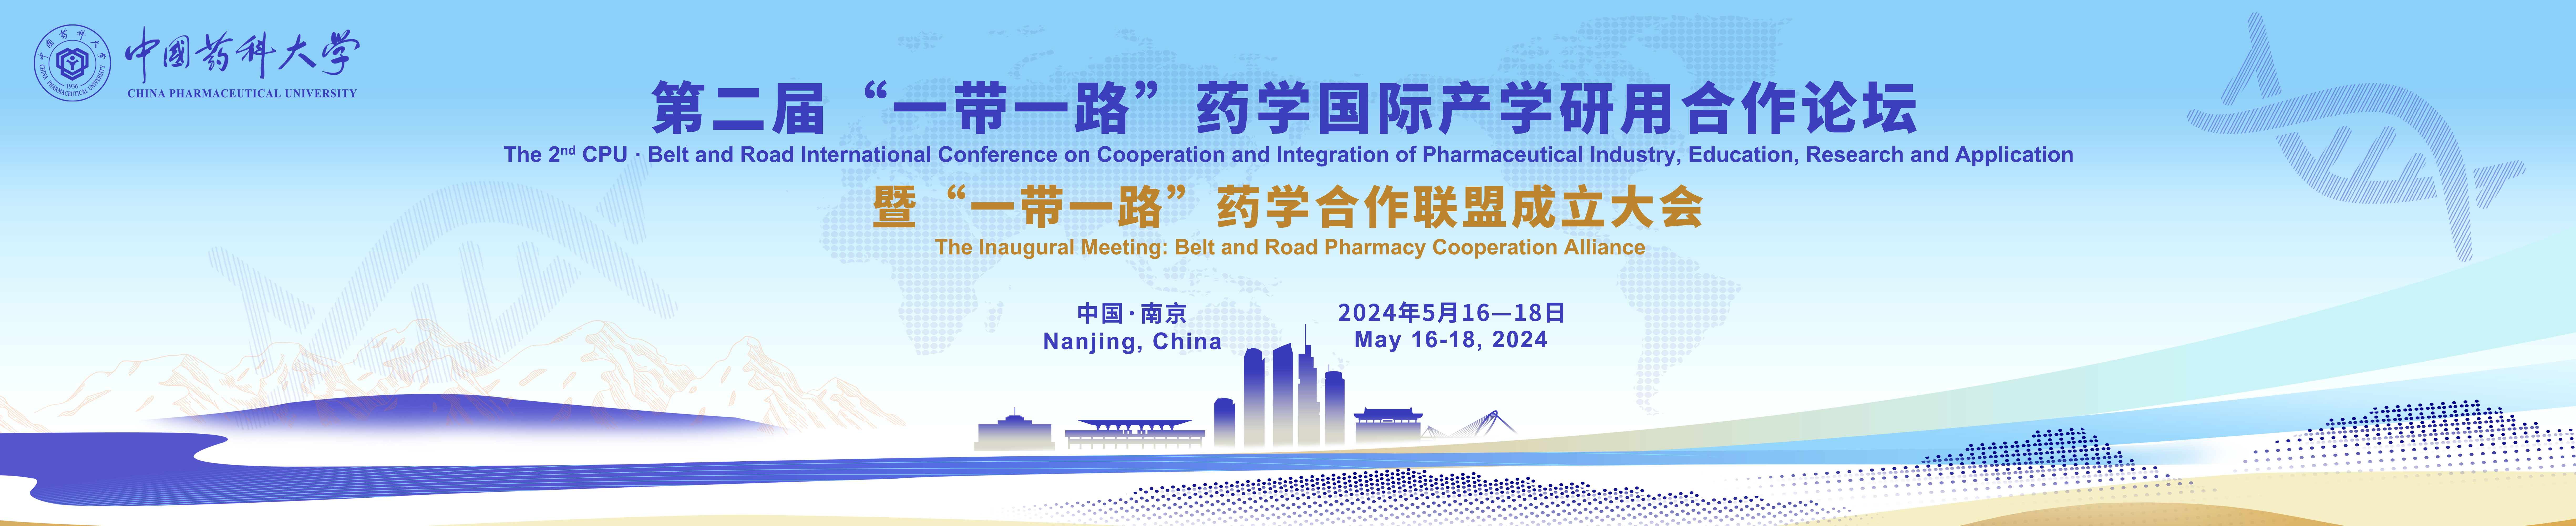 The 2nd CPU·Belt and Road International Conference on Cooperation and Integration of Pharmaceutical Industry, Education, Research and Application& the Inaugural Meeting: Belt and Road Pharmacy Cooperation Alliance